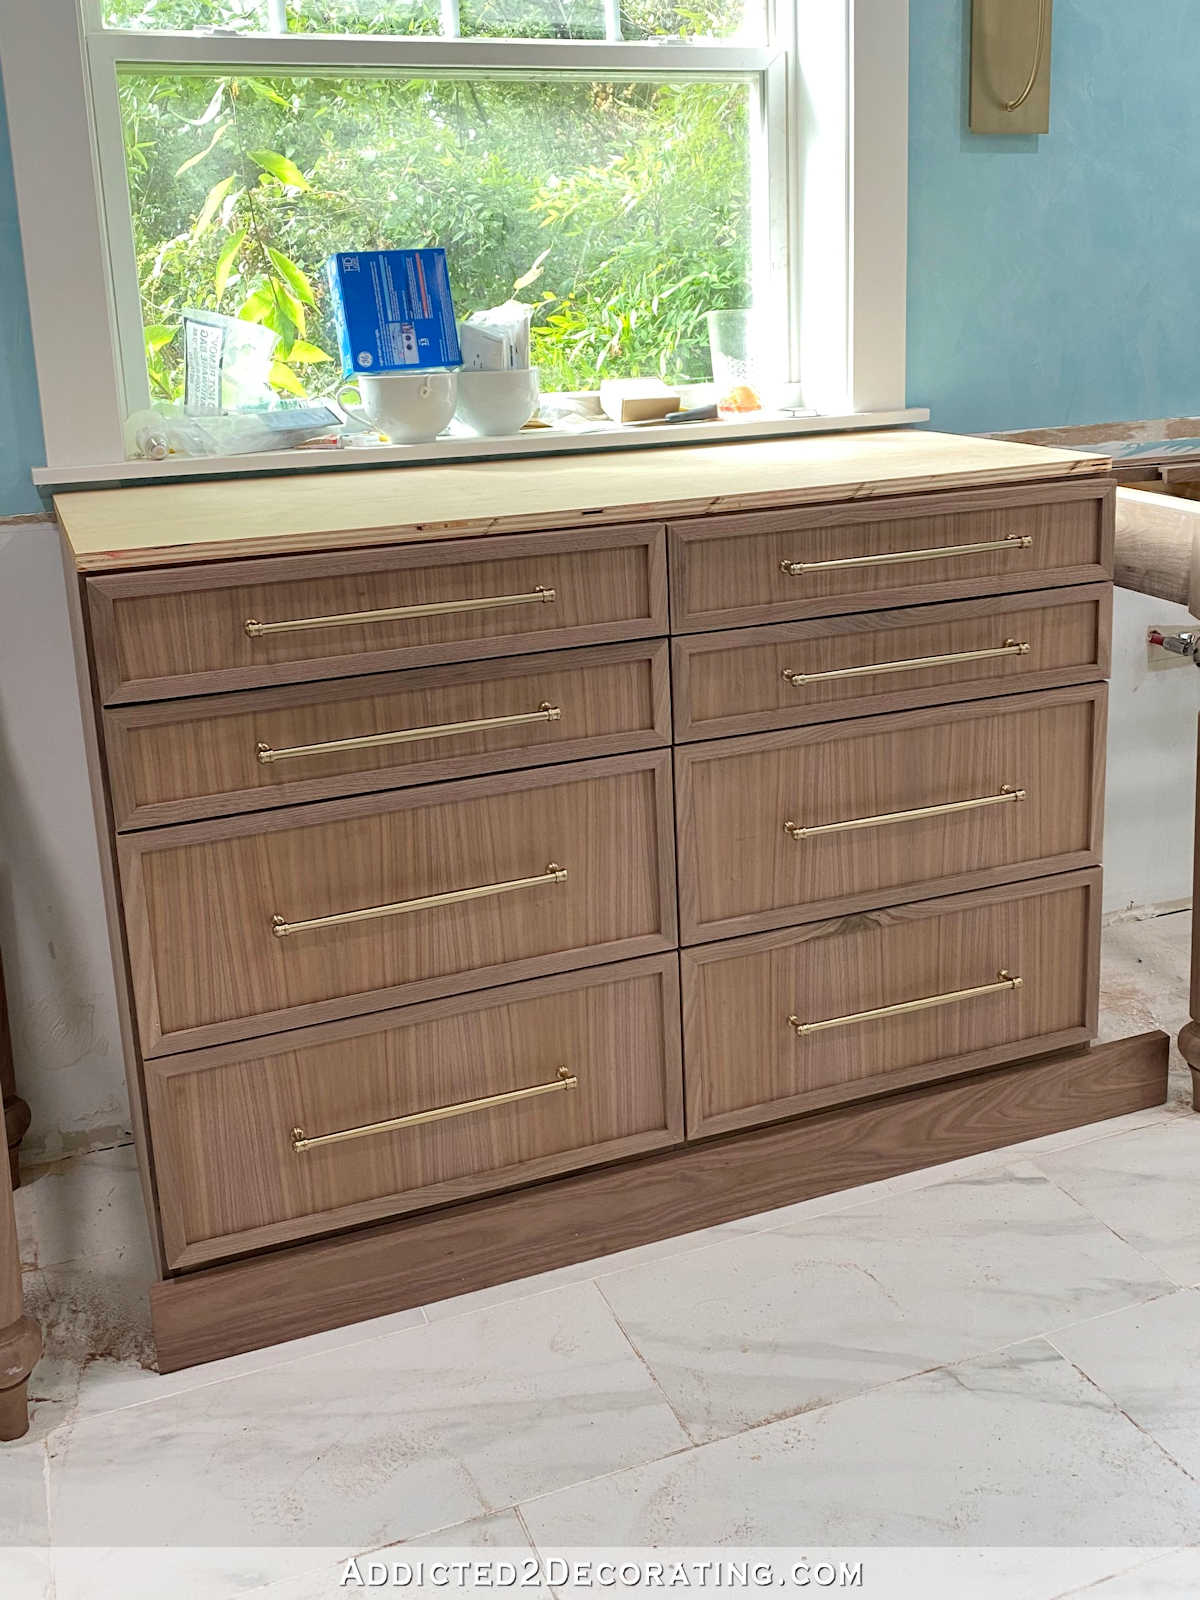 DIY Chest Of Drawers — Part 2 (Walnut Storage Cabinet For Our Bathroom)